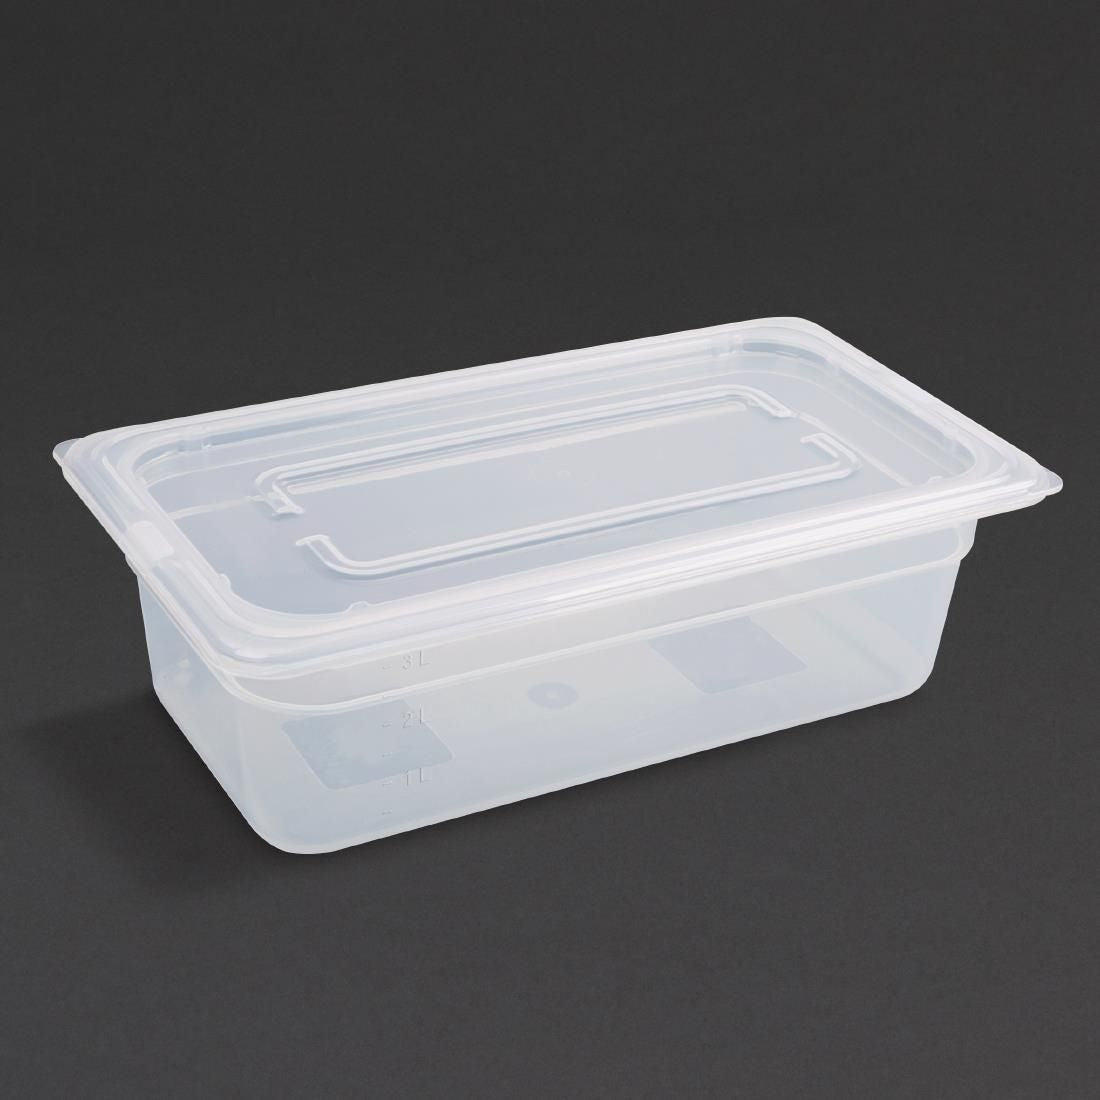 GJ519 Vogue Polypropylene 1/3 Gastronorm Container with Lid 100mm (Pack of 4) JD Catering Equipment Solutions Ltd